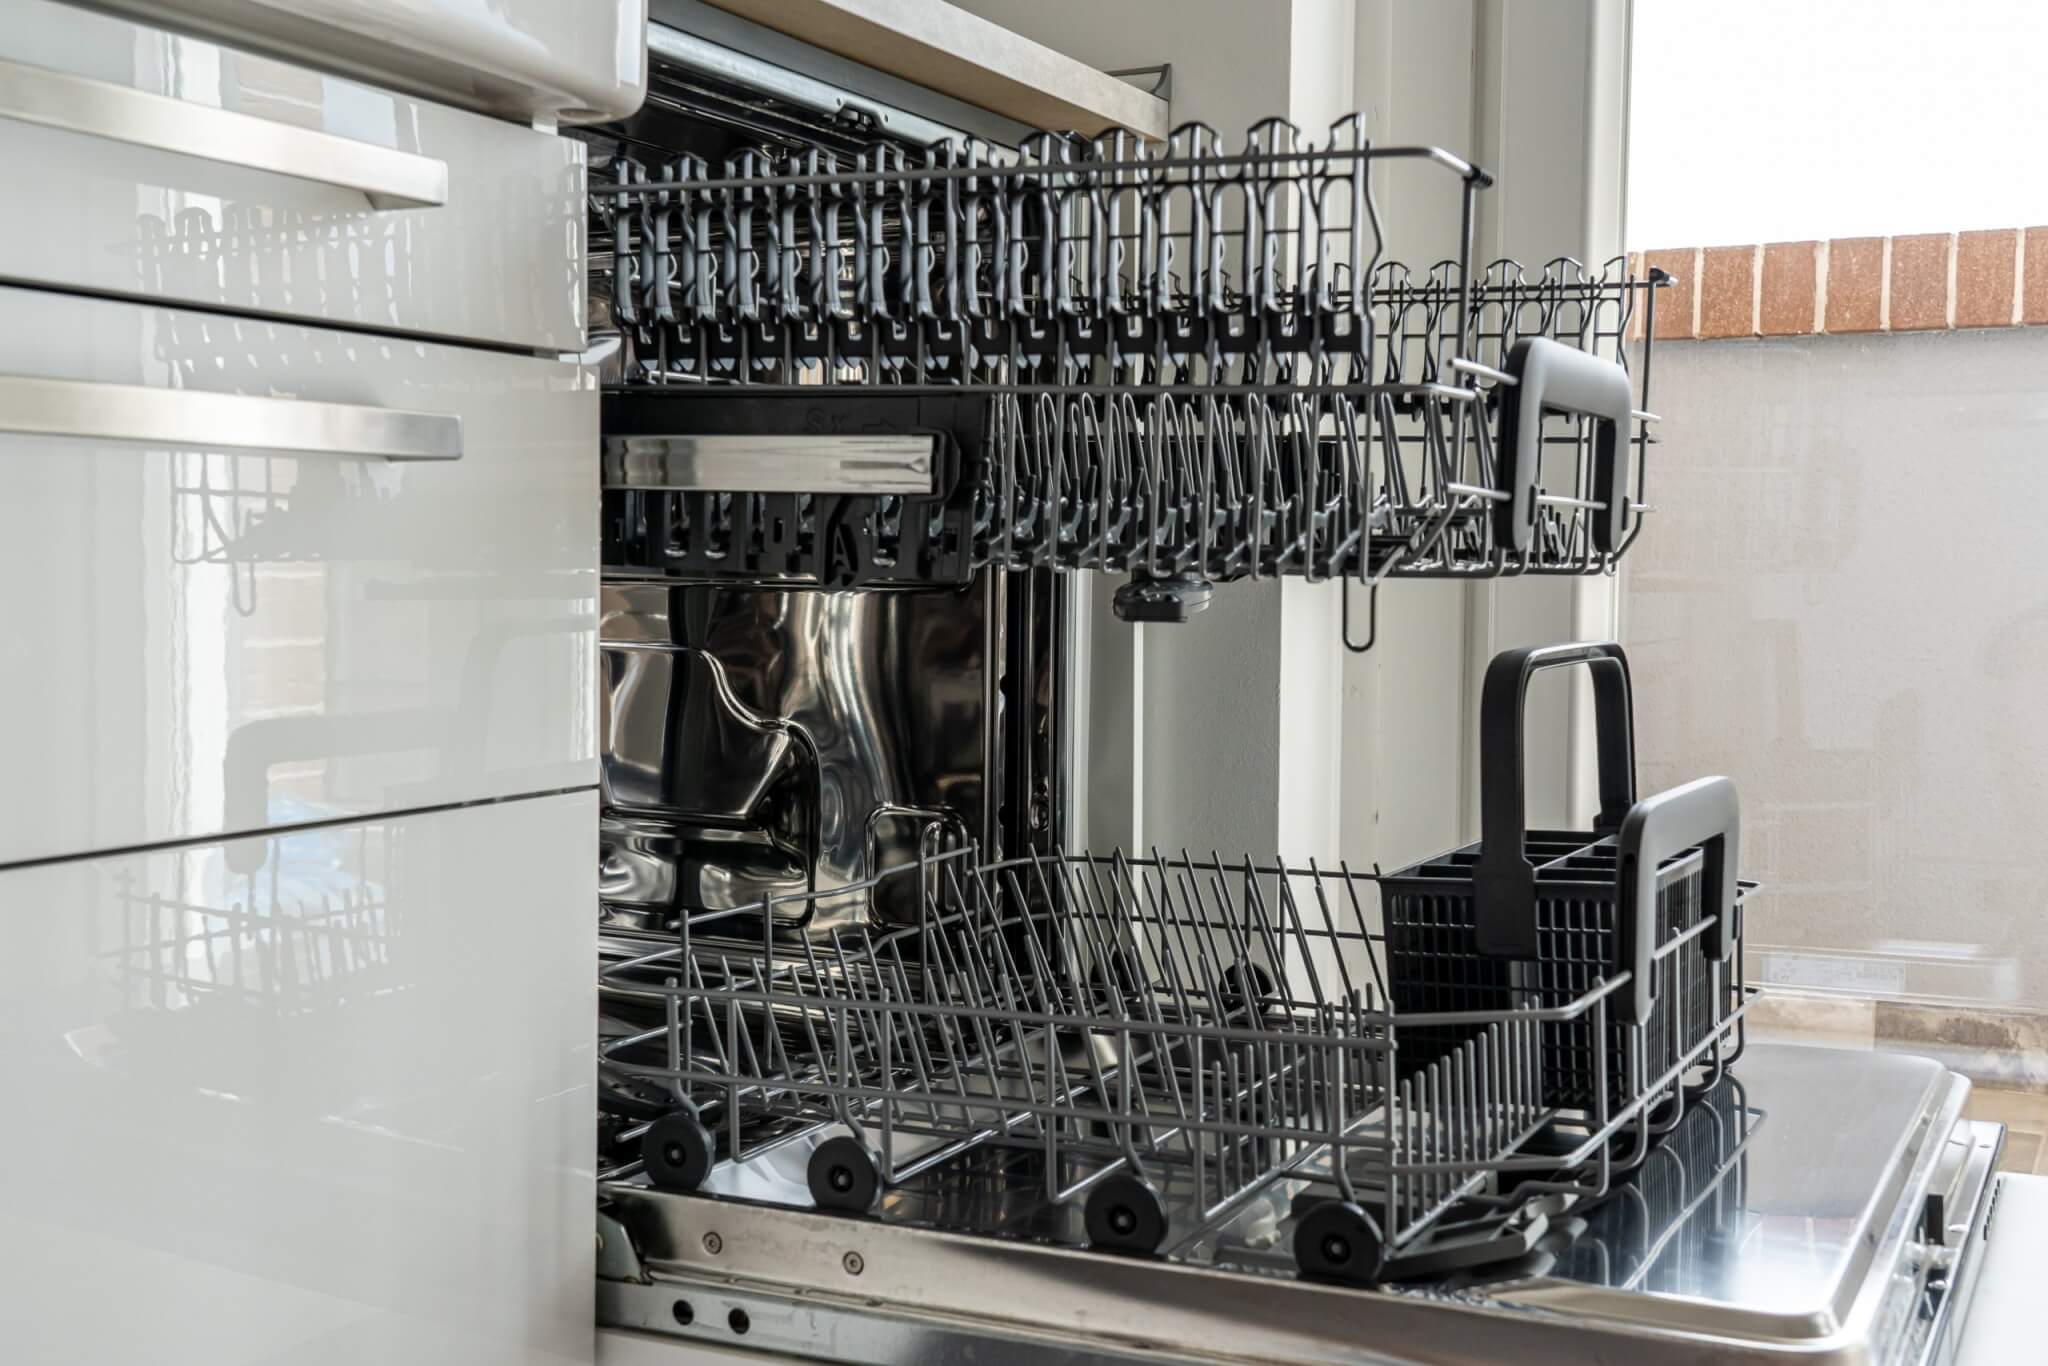 What's the Difference? Samsung Dishwasher Series 2023 